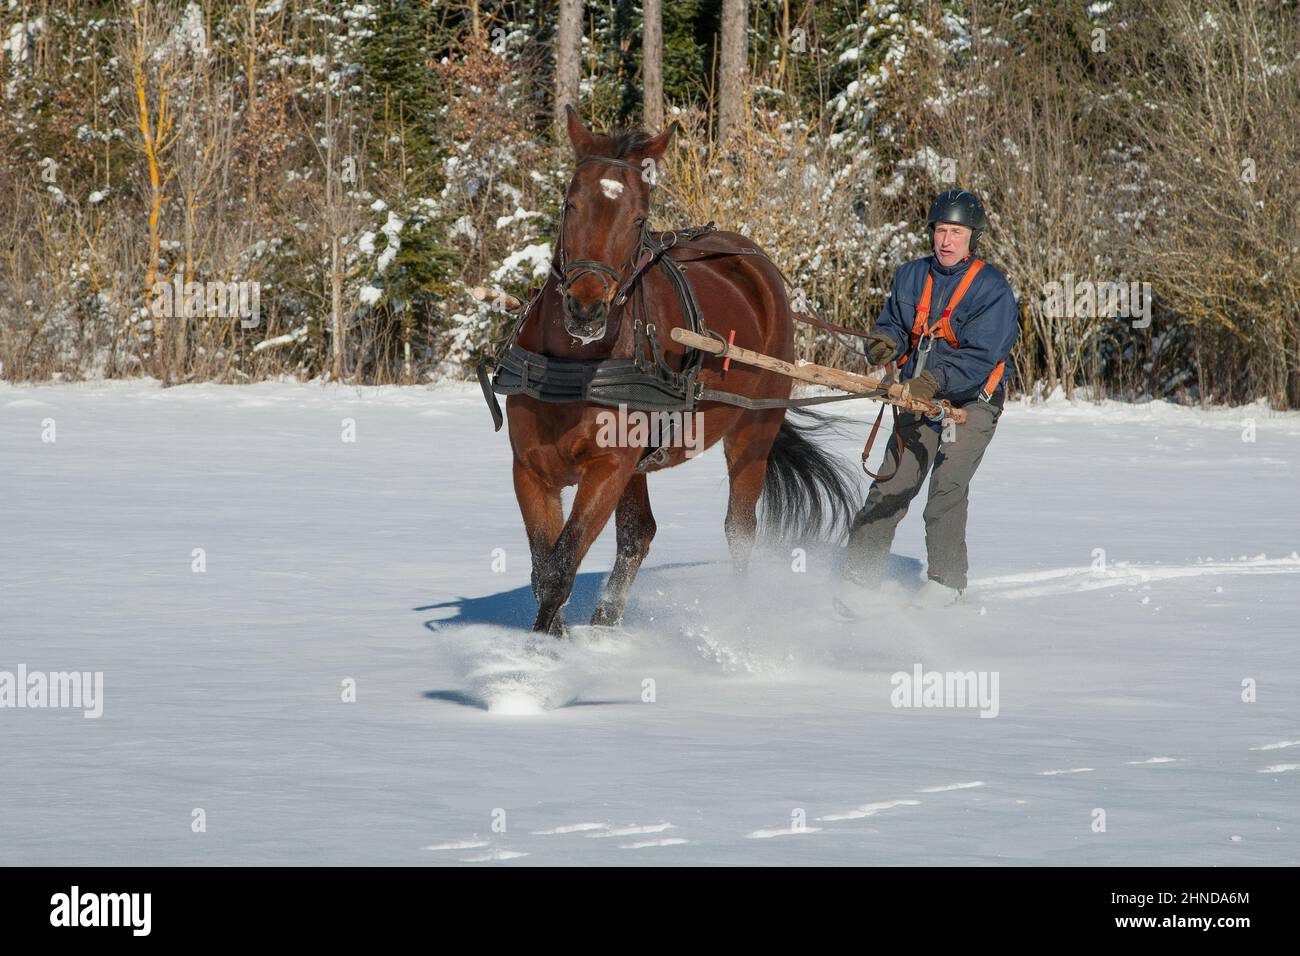 Skioring, winter sports with horse. A man stands on skis and lets himself be dragged by his horse through the winter landscape. Skijoring is a winter Stock Photo